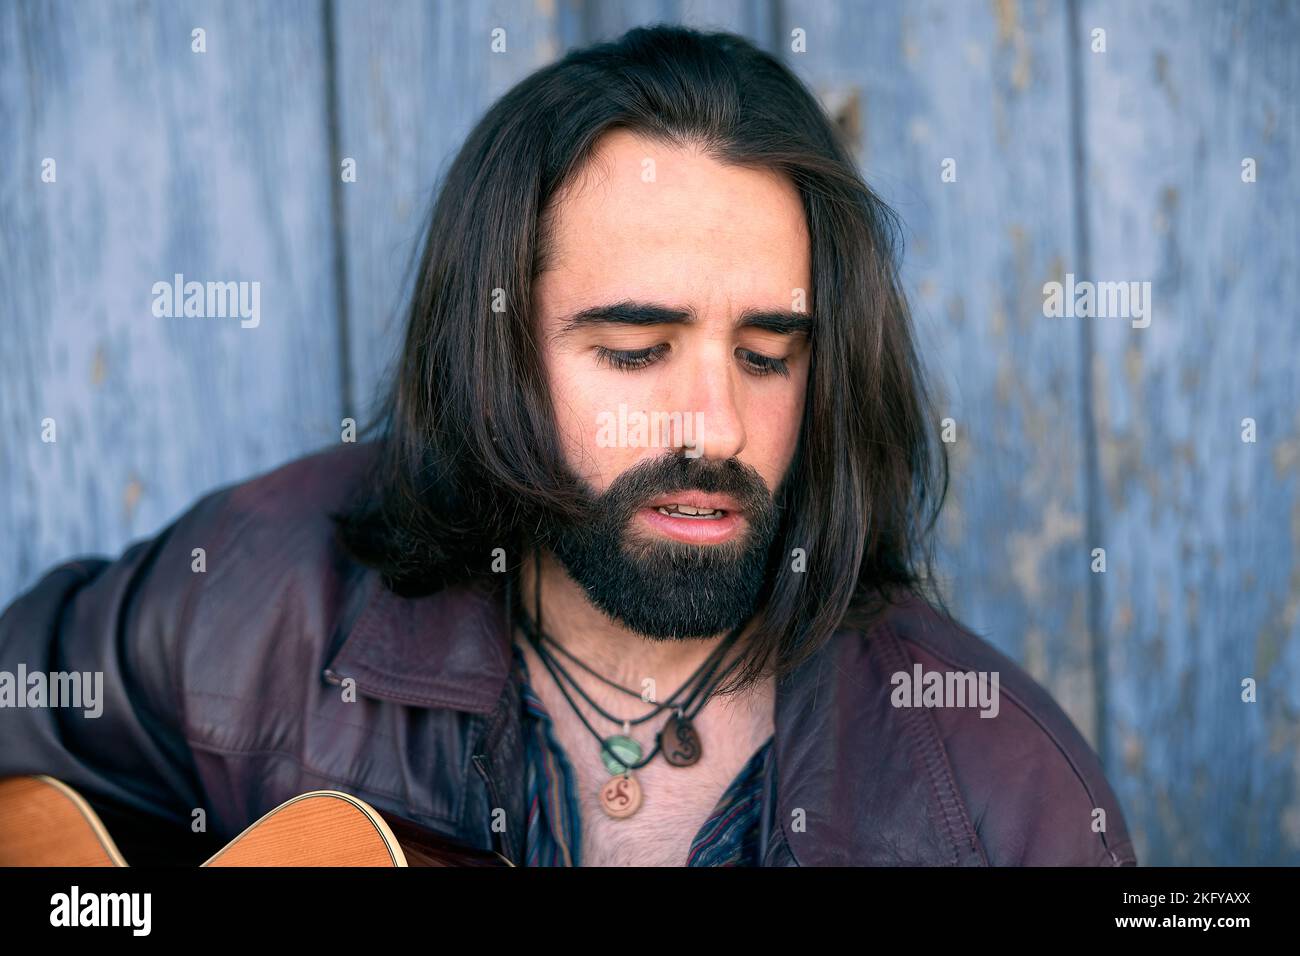 closeup face young caucasian man with fur jacket beard and long hair sitting in the doorway of a house Stock Photo